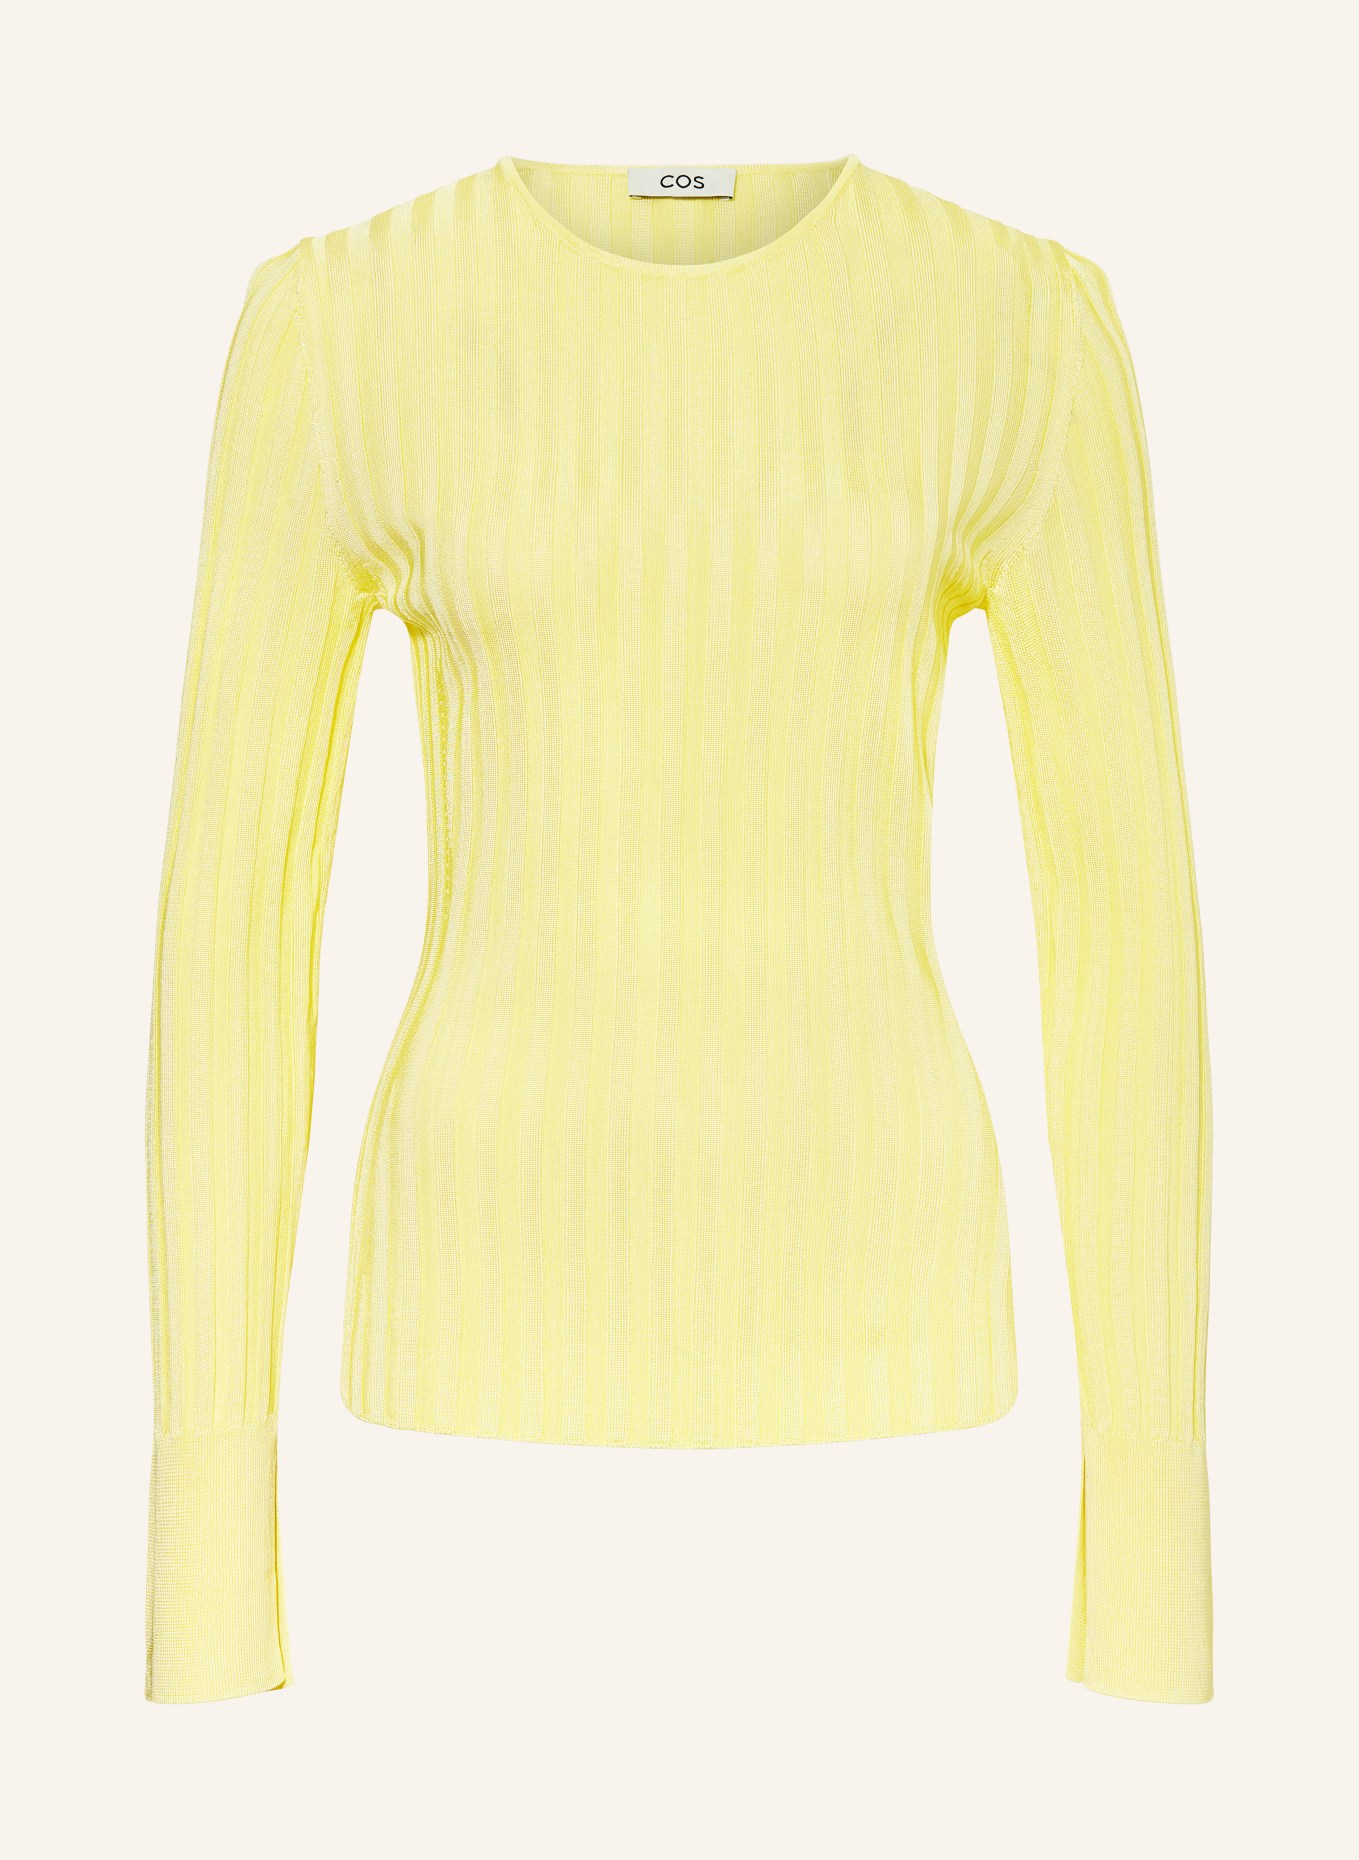 COS Long sleeve shirt, Color: YELLOW (Image 1)